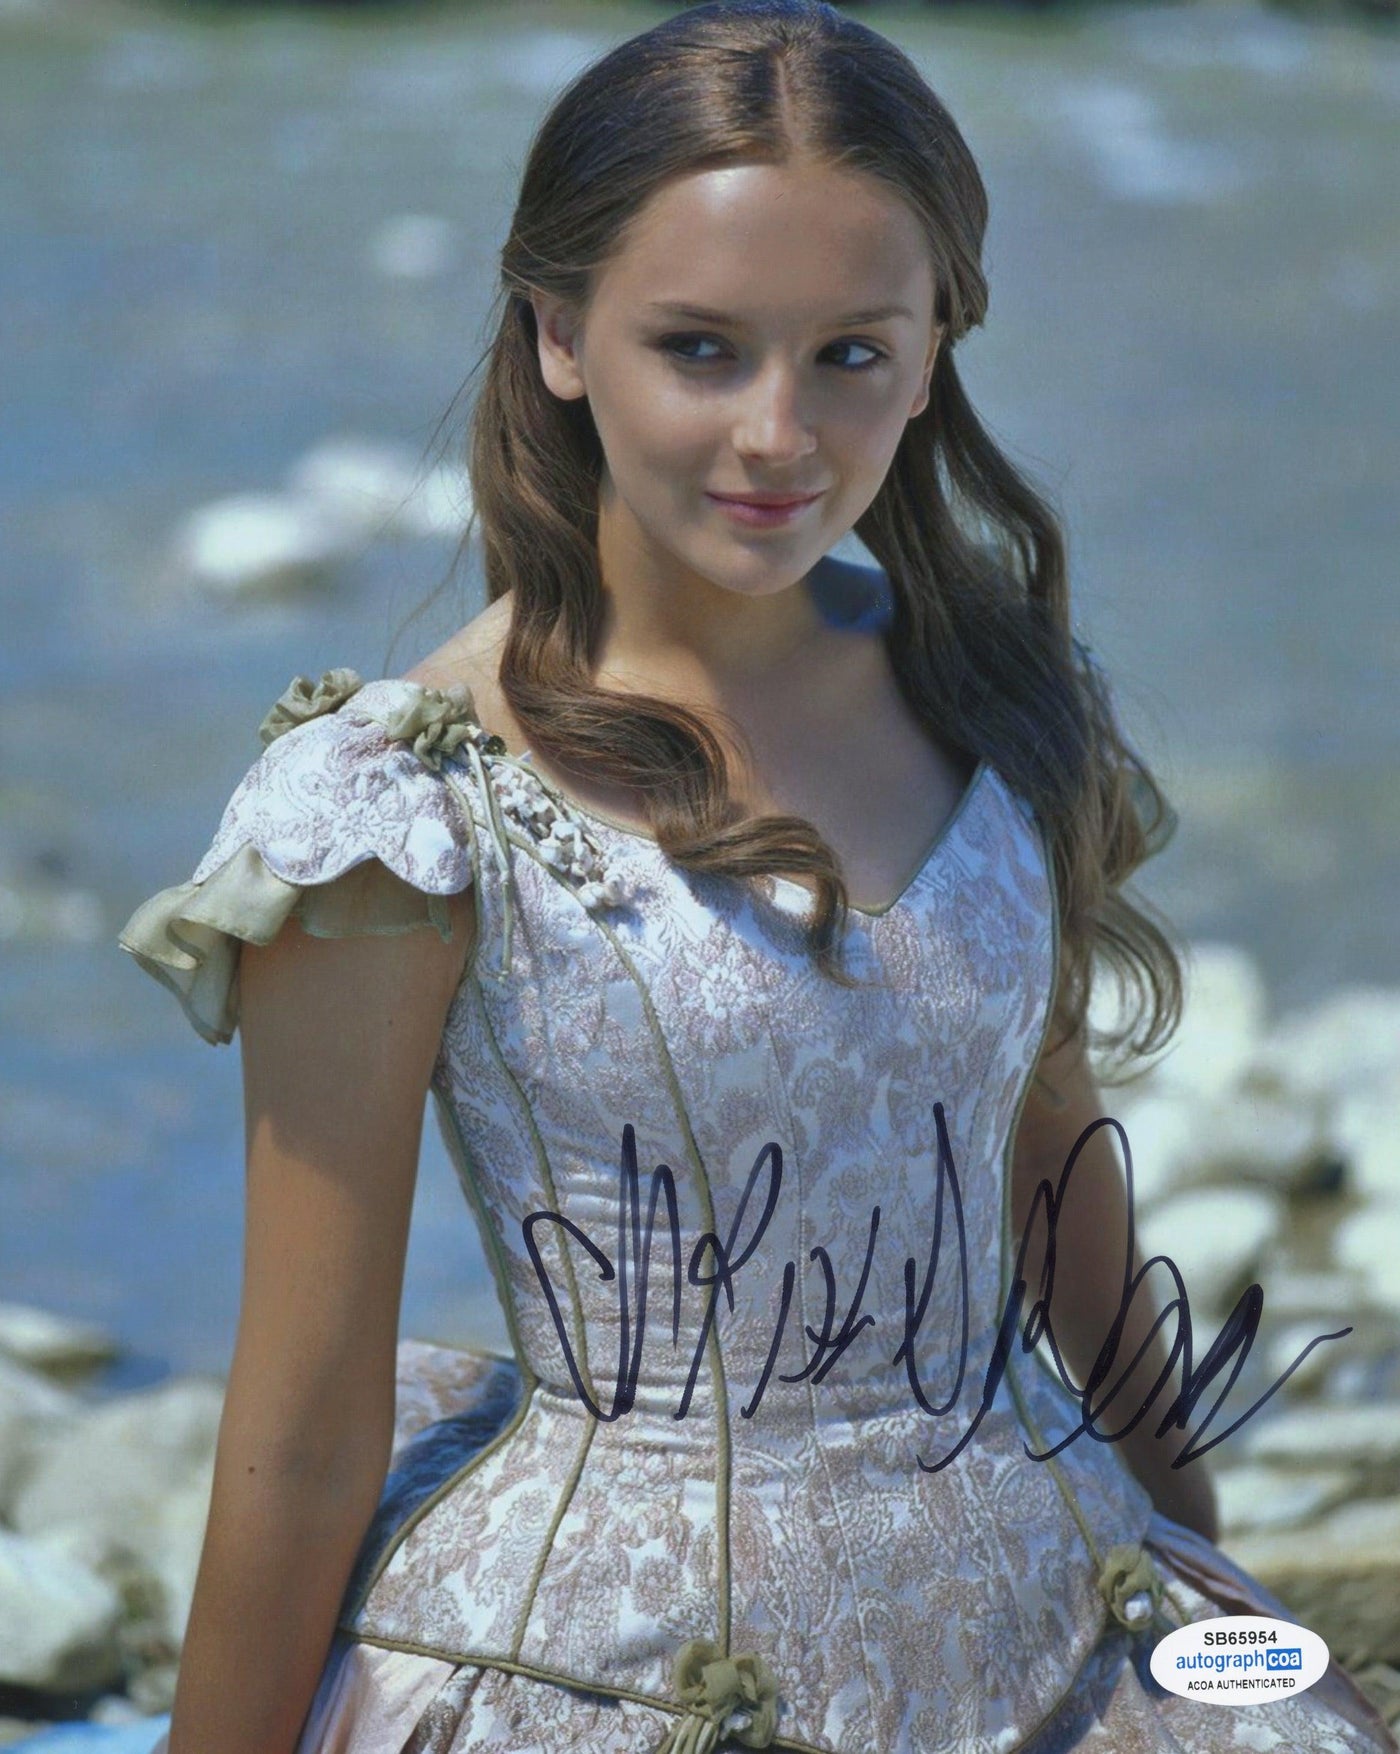 Rachael Leigh Cook Signed 8x10 Photo Autographed ACOA